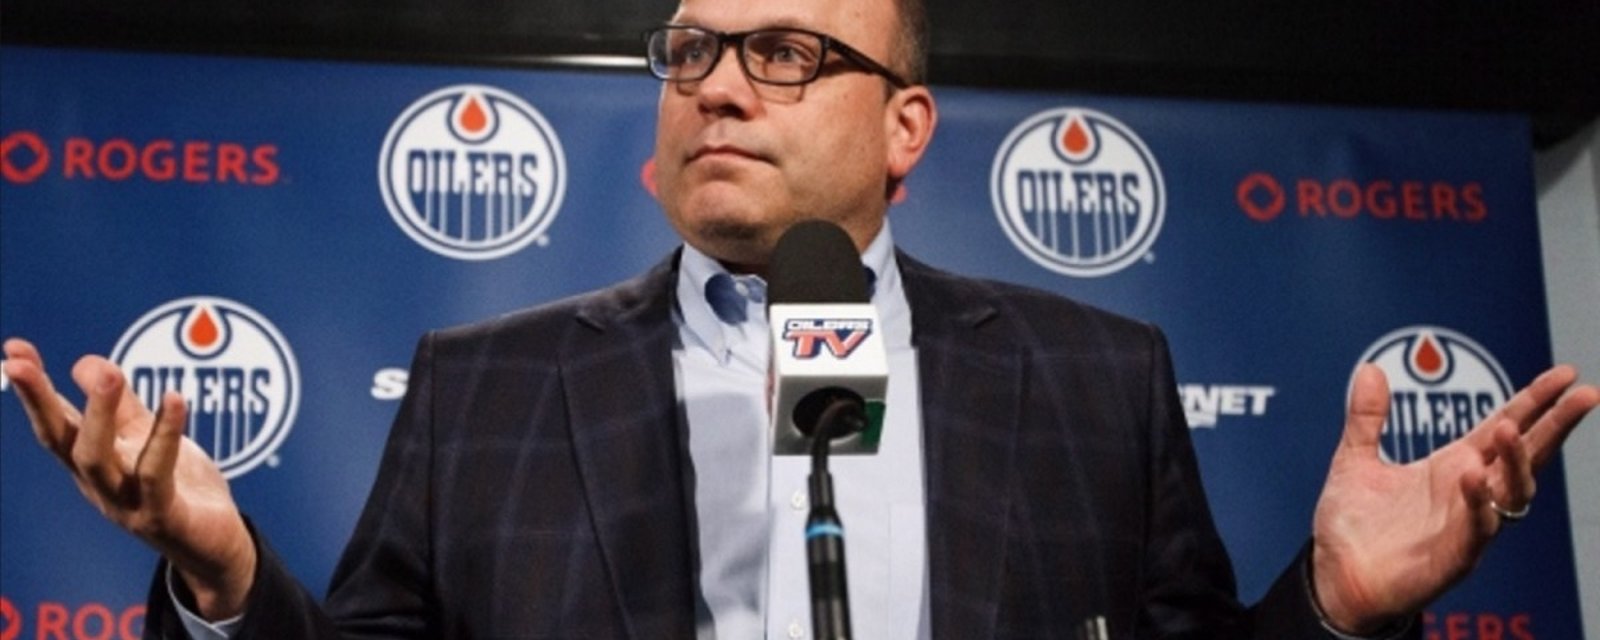 Peter Chiarelli proves he has not accepted responsibility for his terrible tenure in Edmonton.